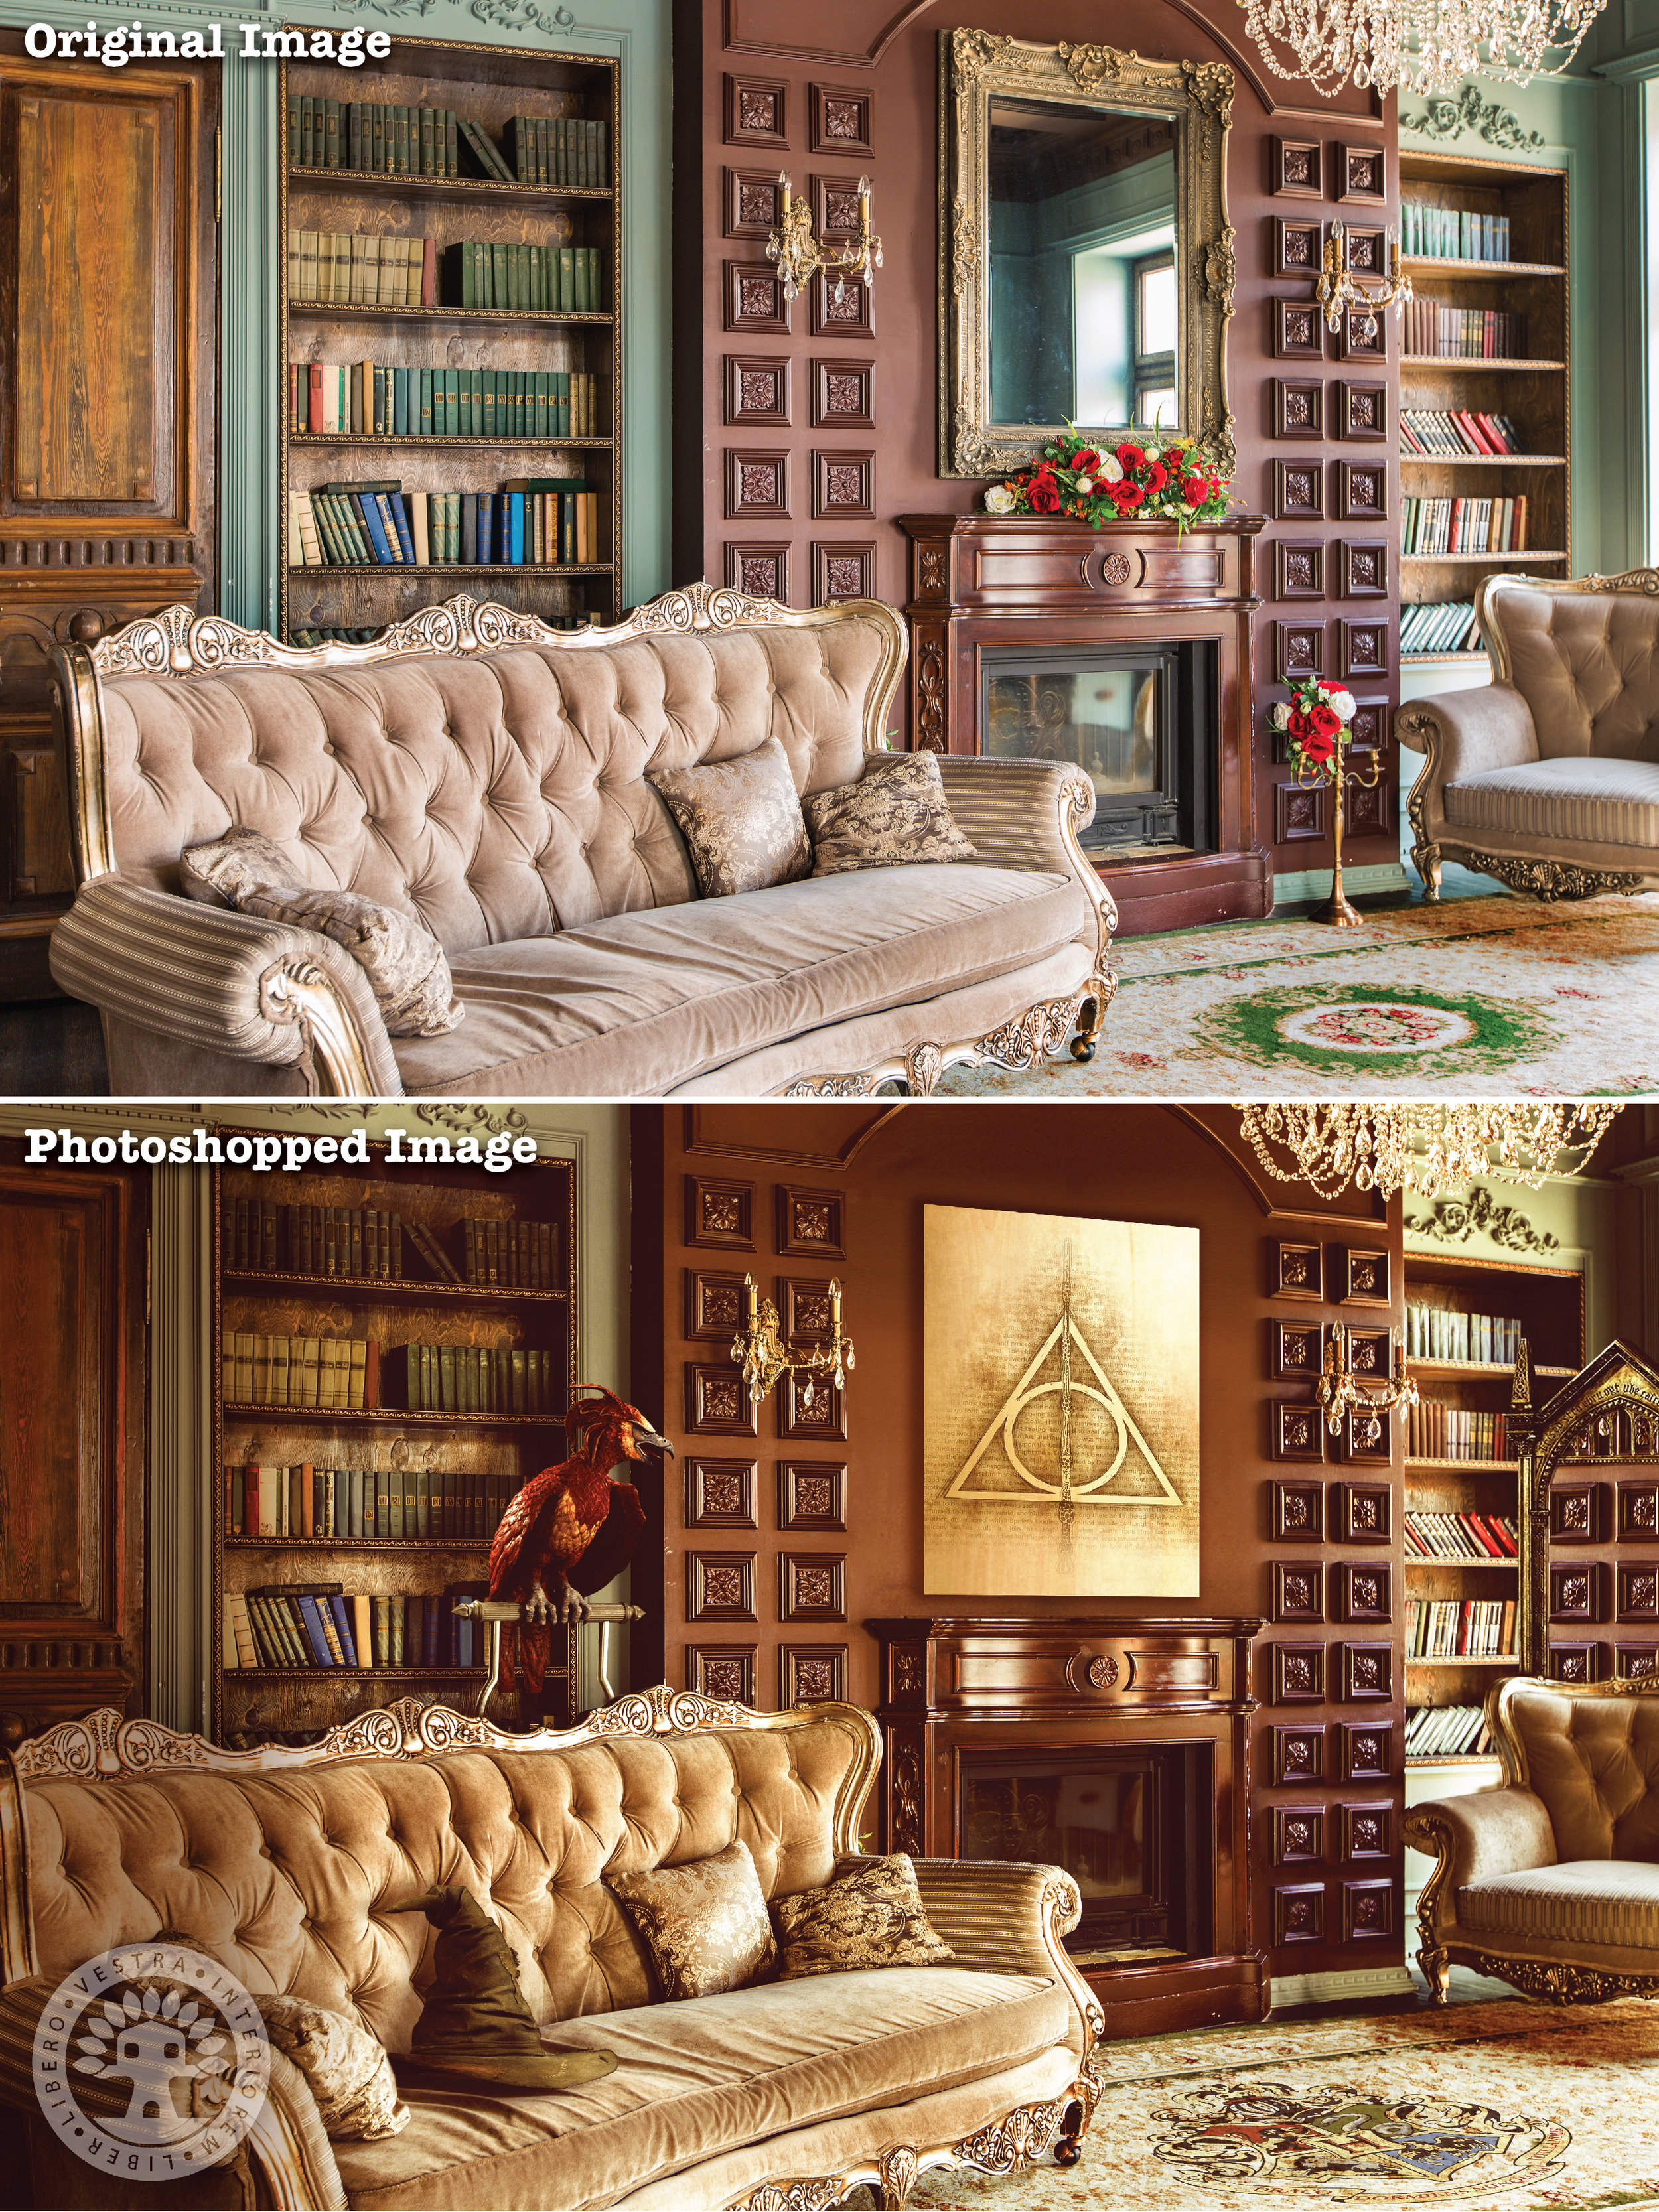 "Dumbledore's Study" before and after Photoshop . ~ Corinne Jade, ClubHouse Collective